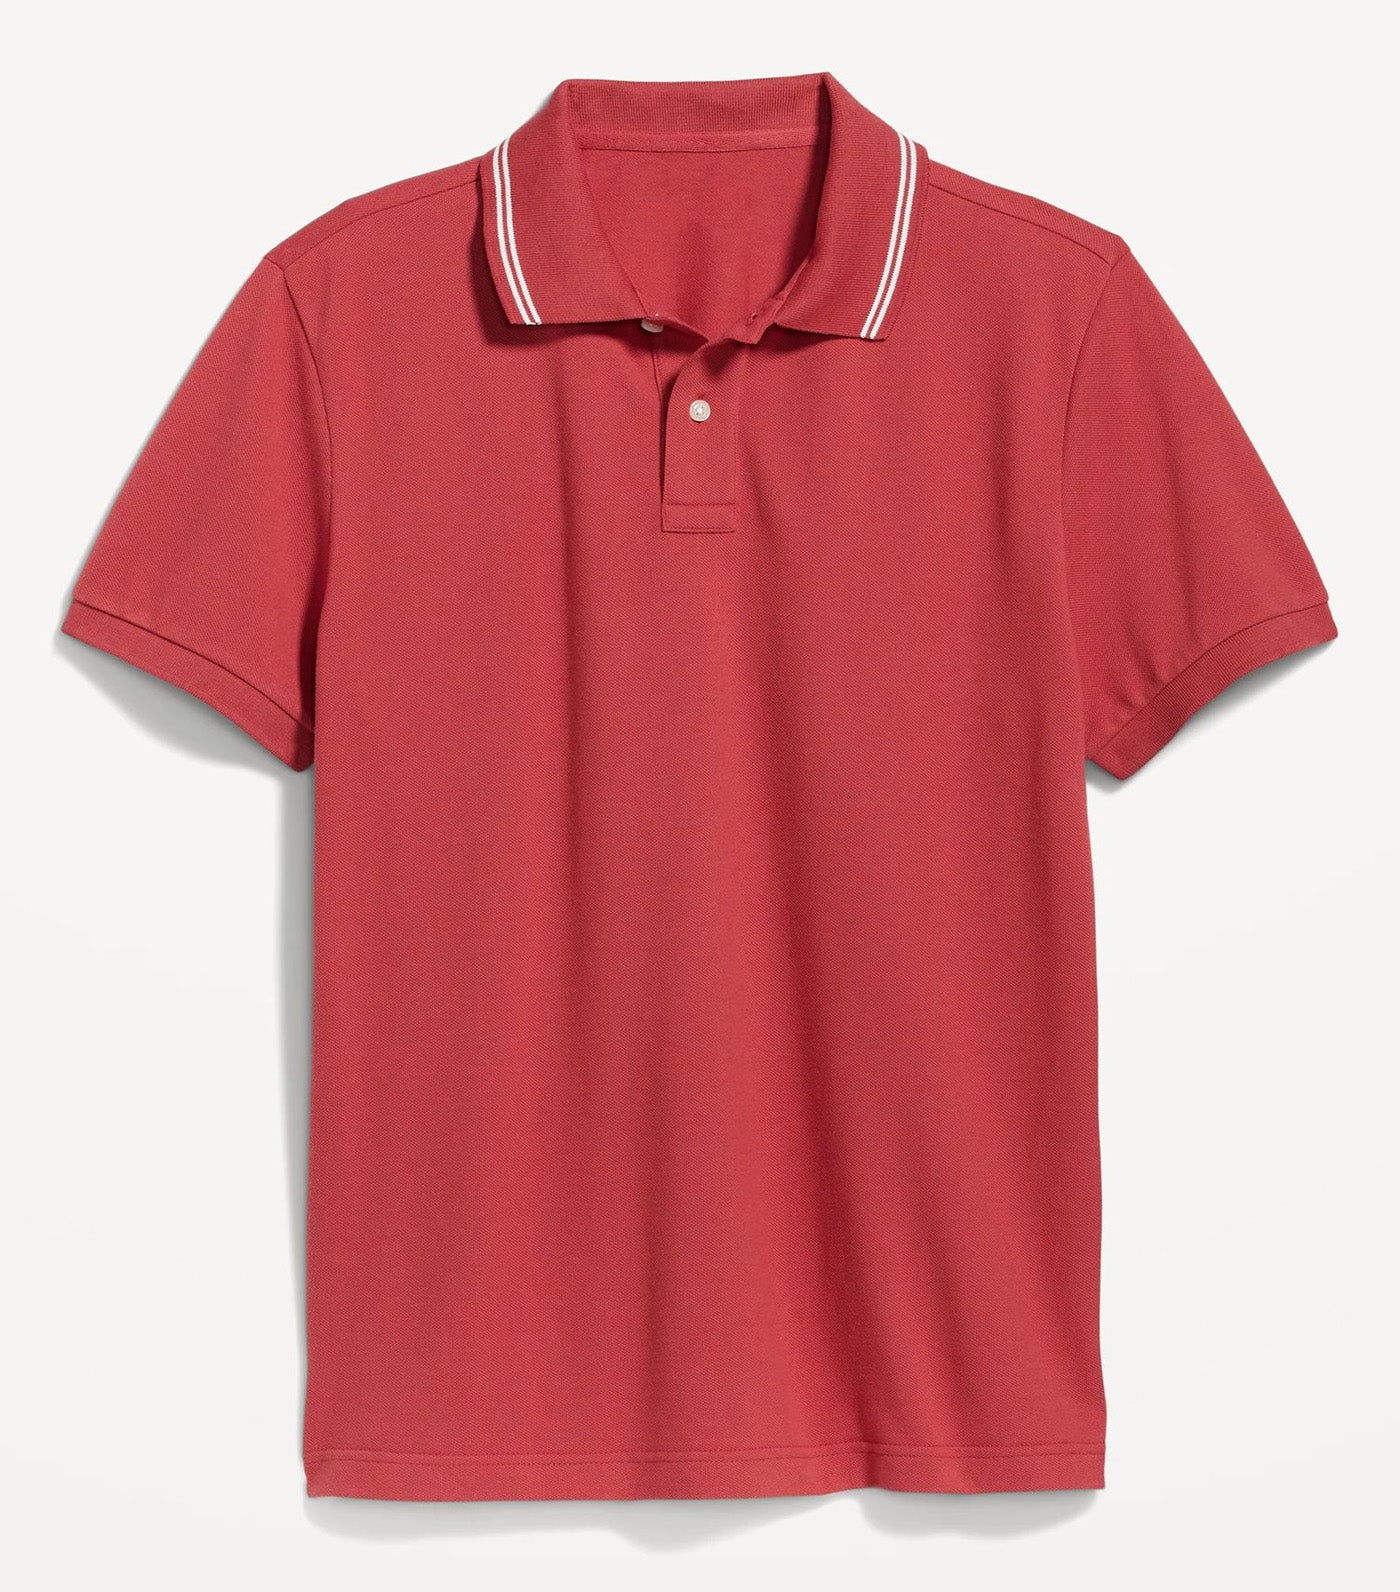 Tipped-Collar Classic Fit Pique Polo for Men Tomato Juice